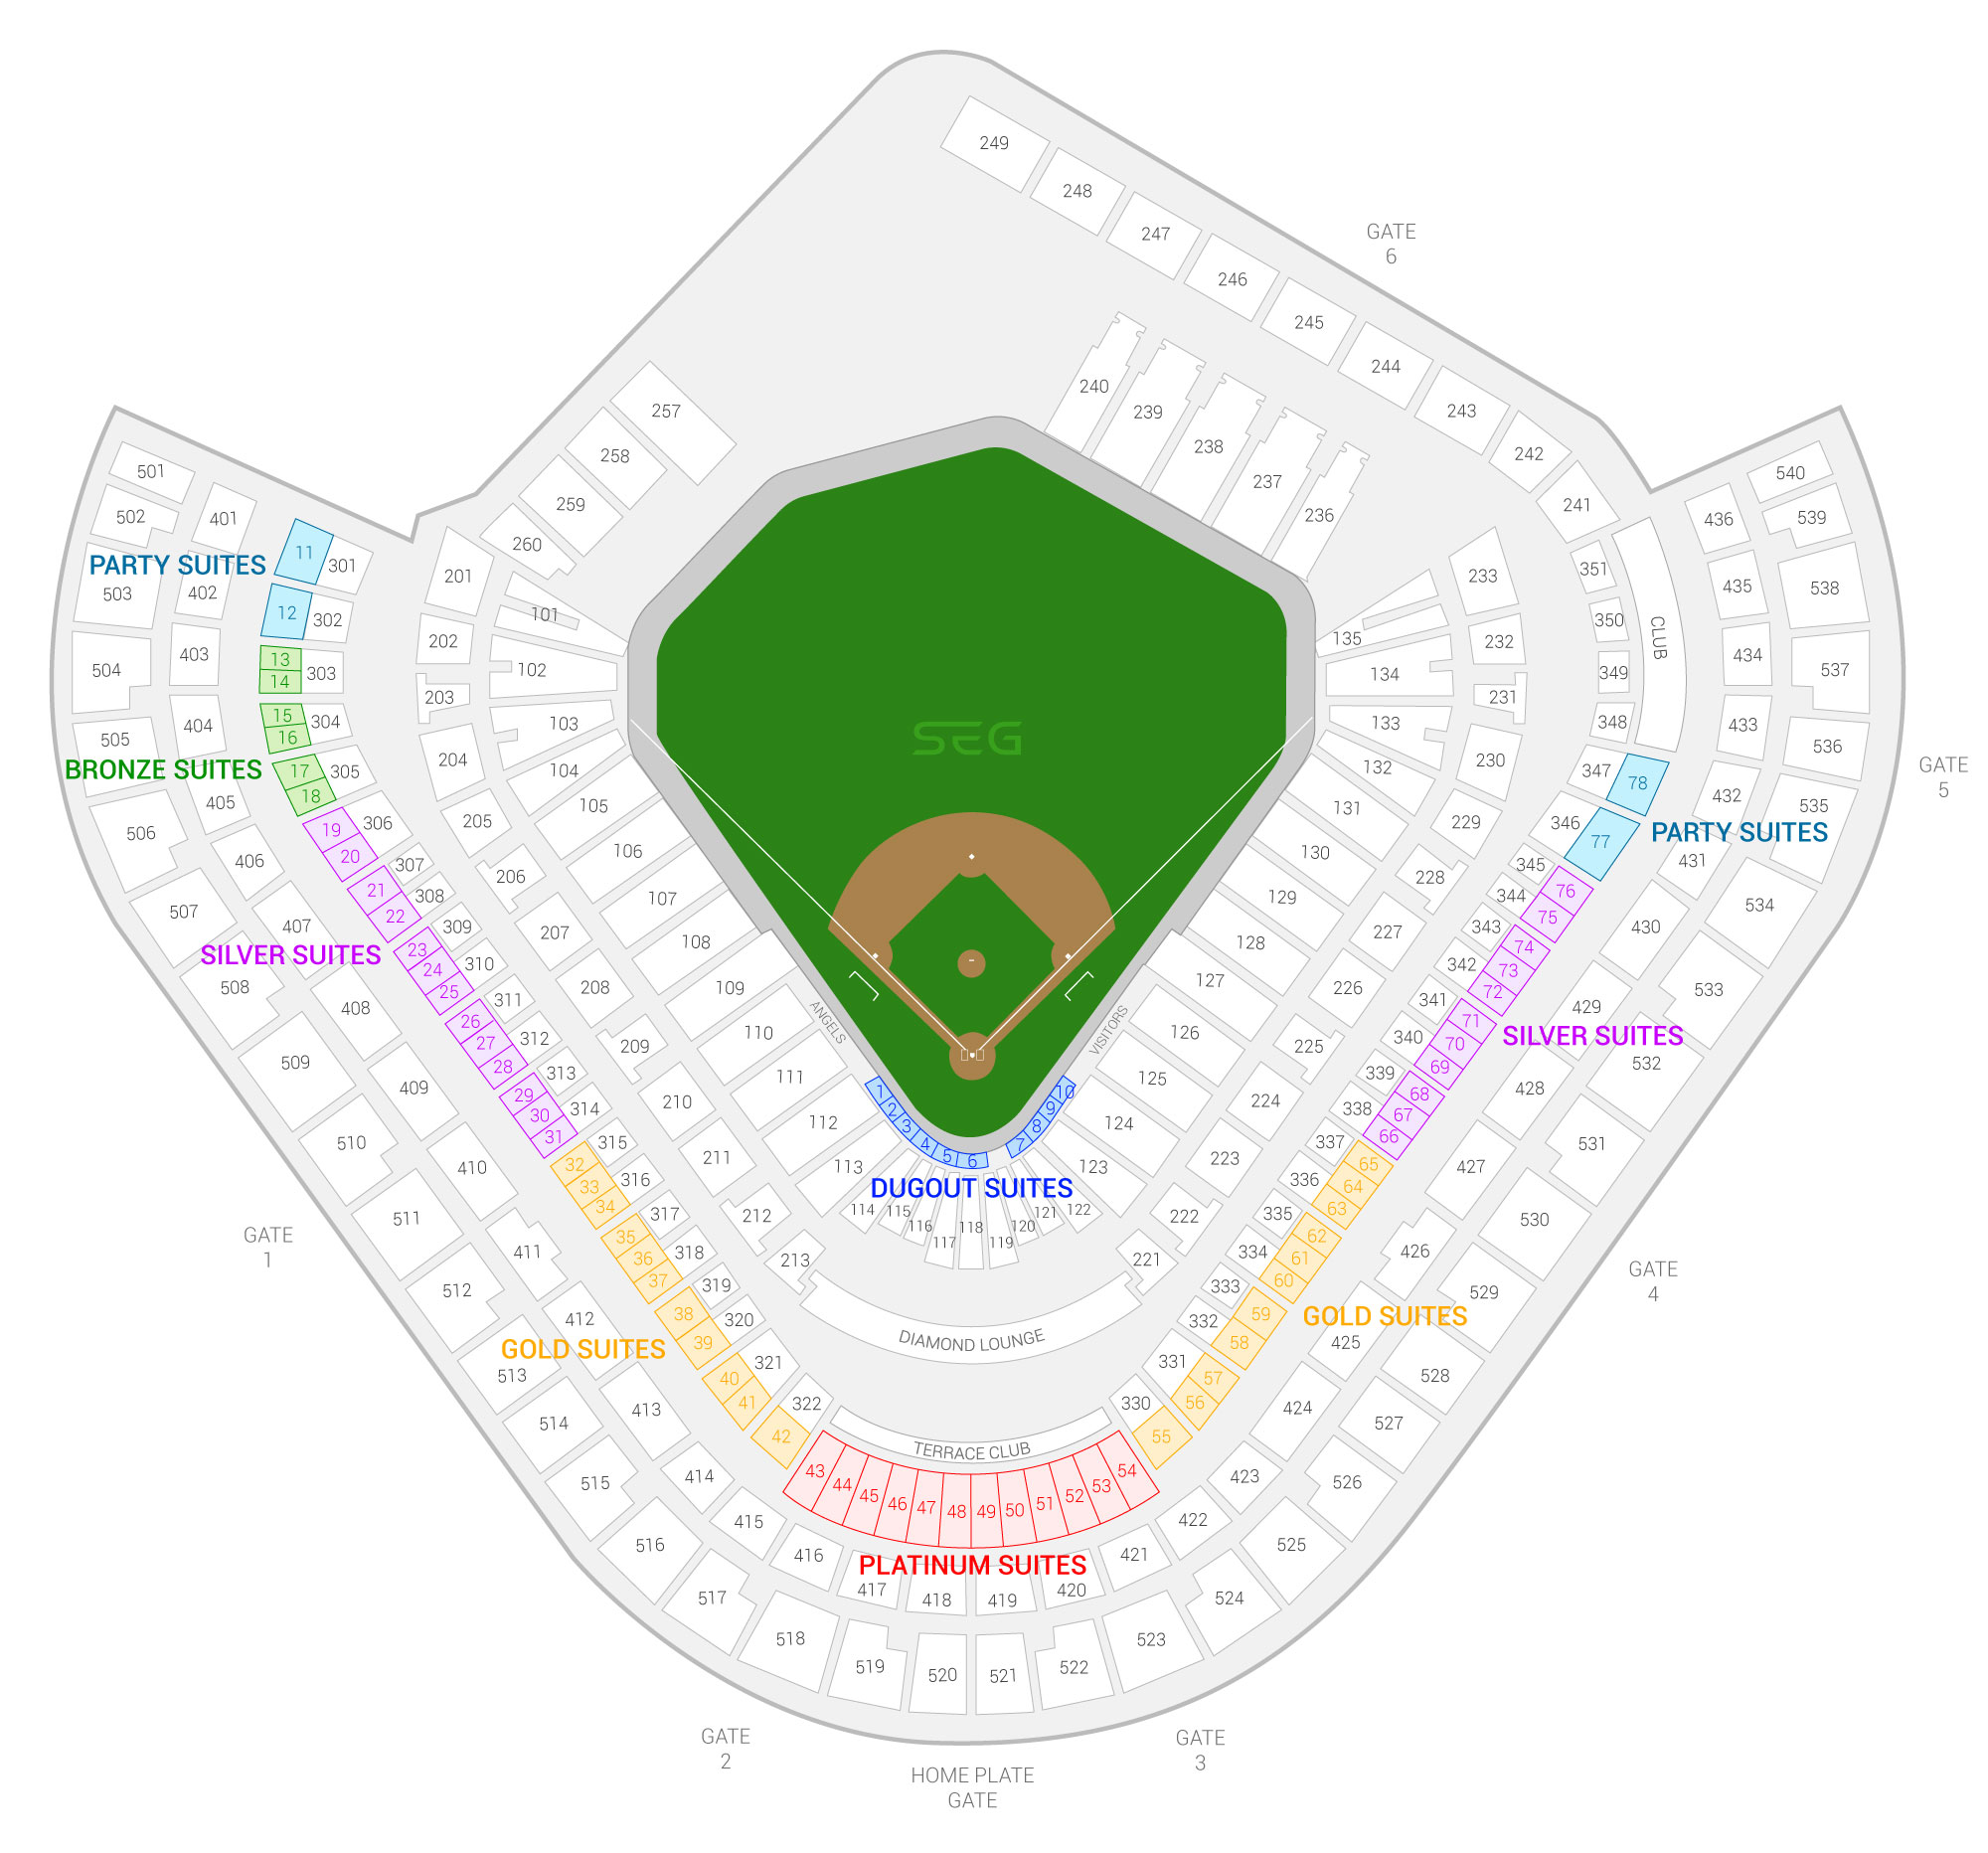 Angel Stadium of Anaheim / Los Angeles Angels Suite Map and Seating Chart